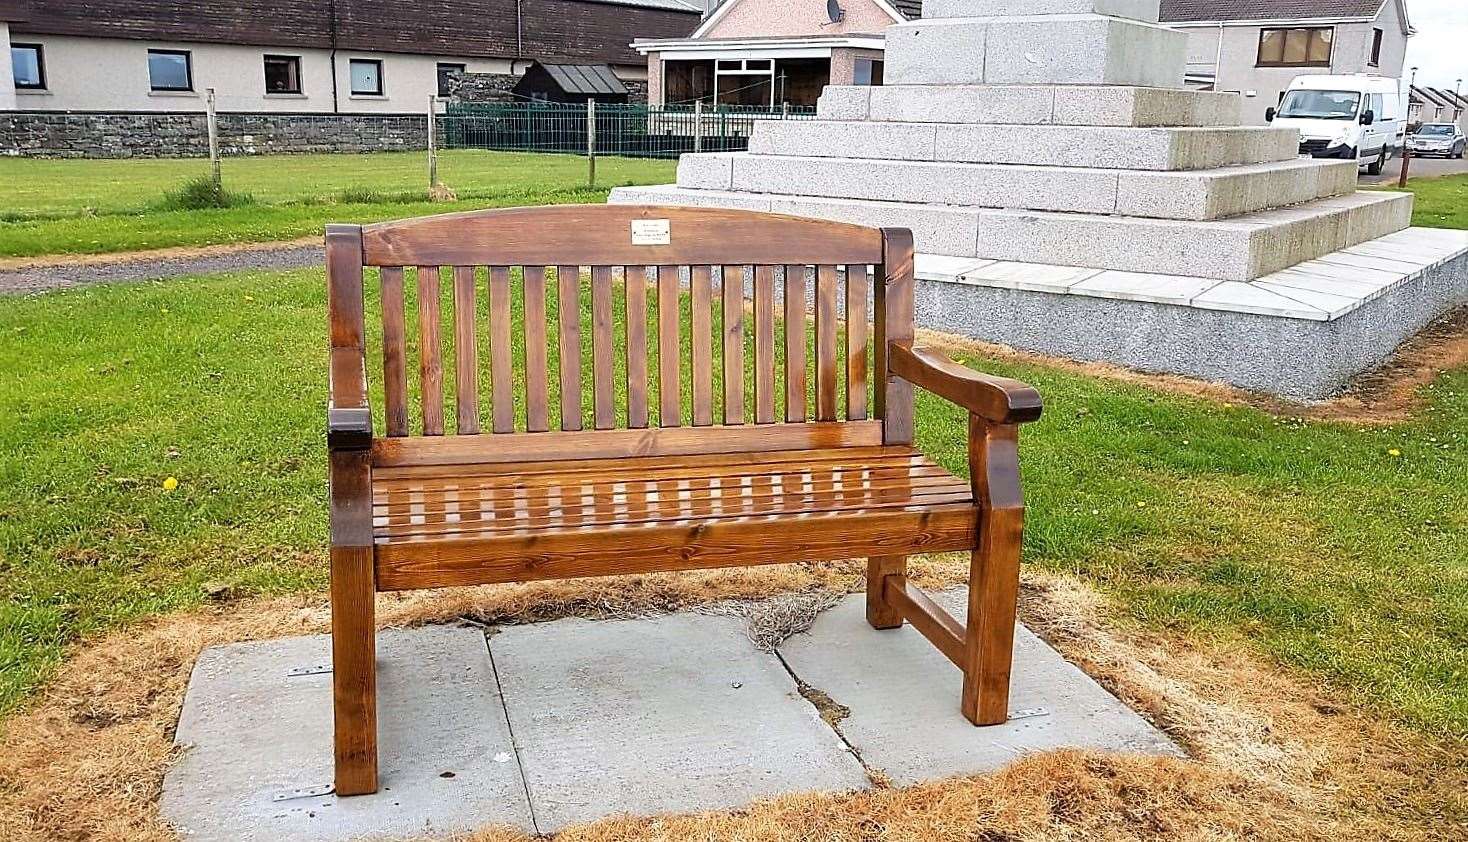 The bench was put there several years ago in memory of Sandra Briggs nee MacLeod.